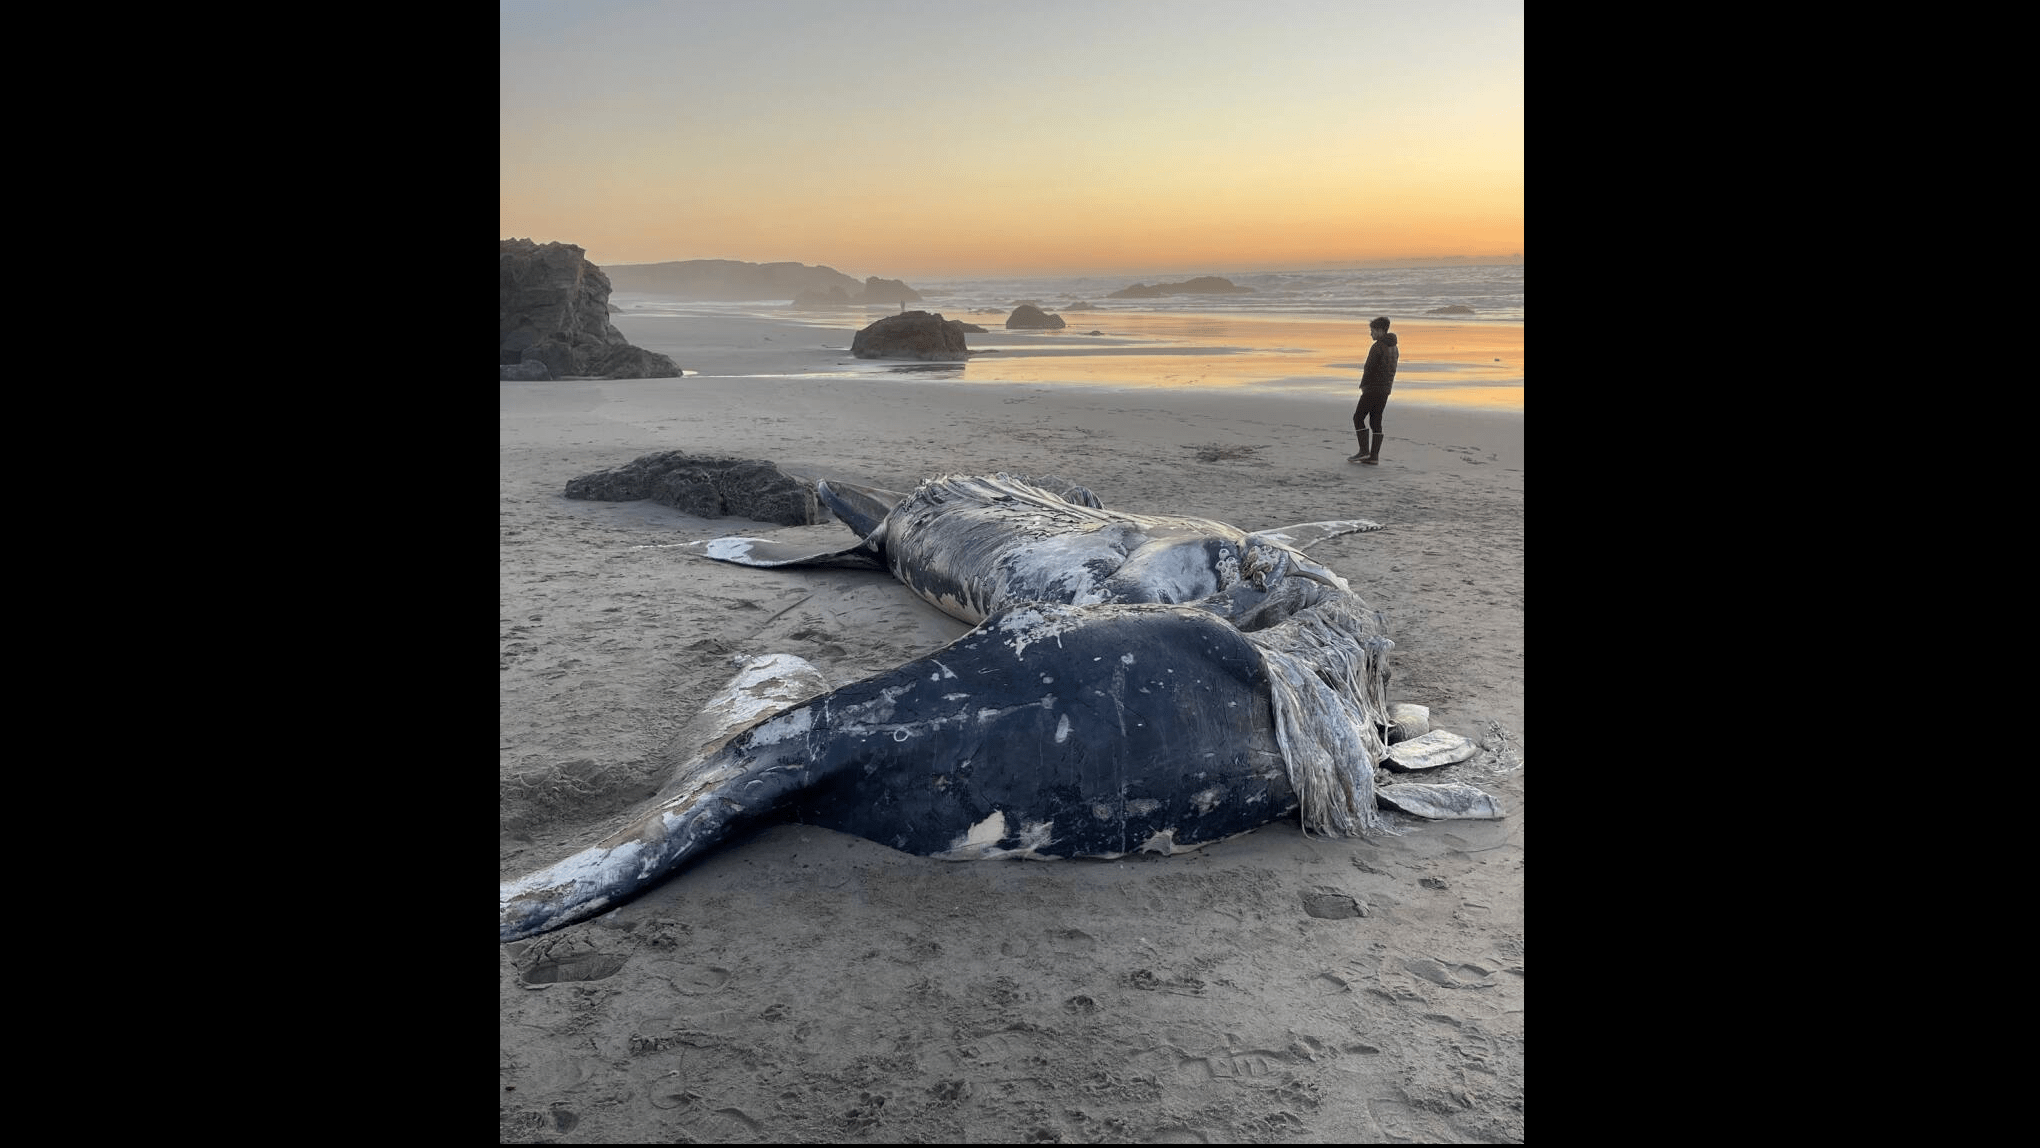 deceased-humback-whale-near-fort-bragg-10-22-22-noyo-center-for-marine-science